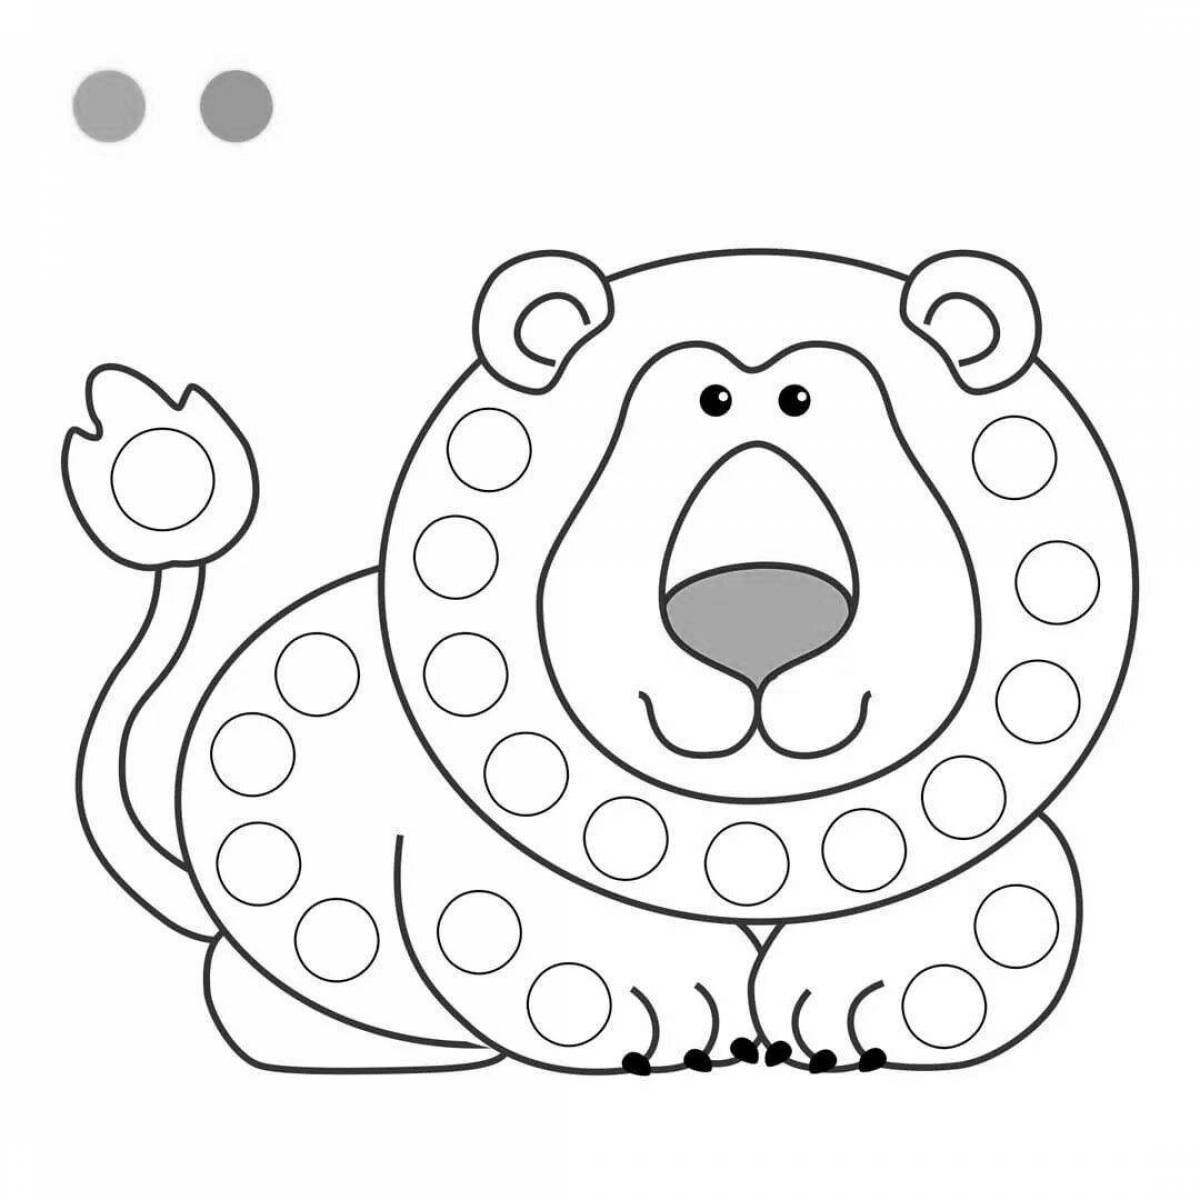 Colorful finger coloring page for kids